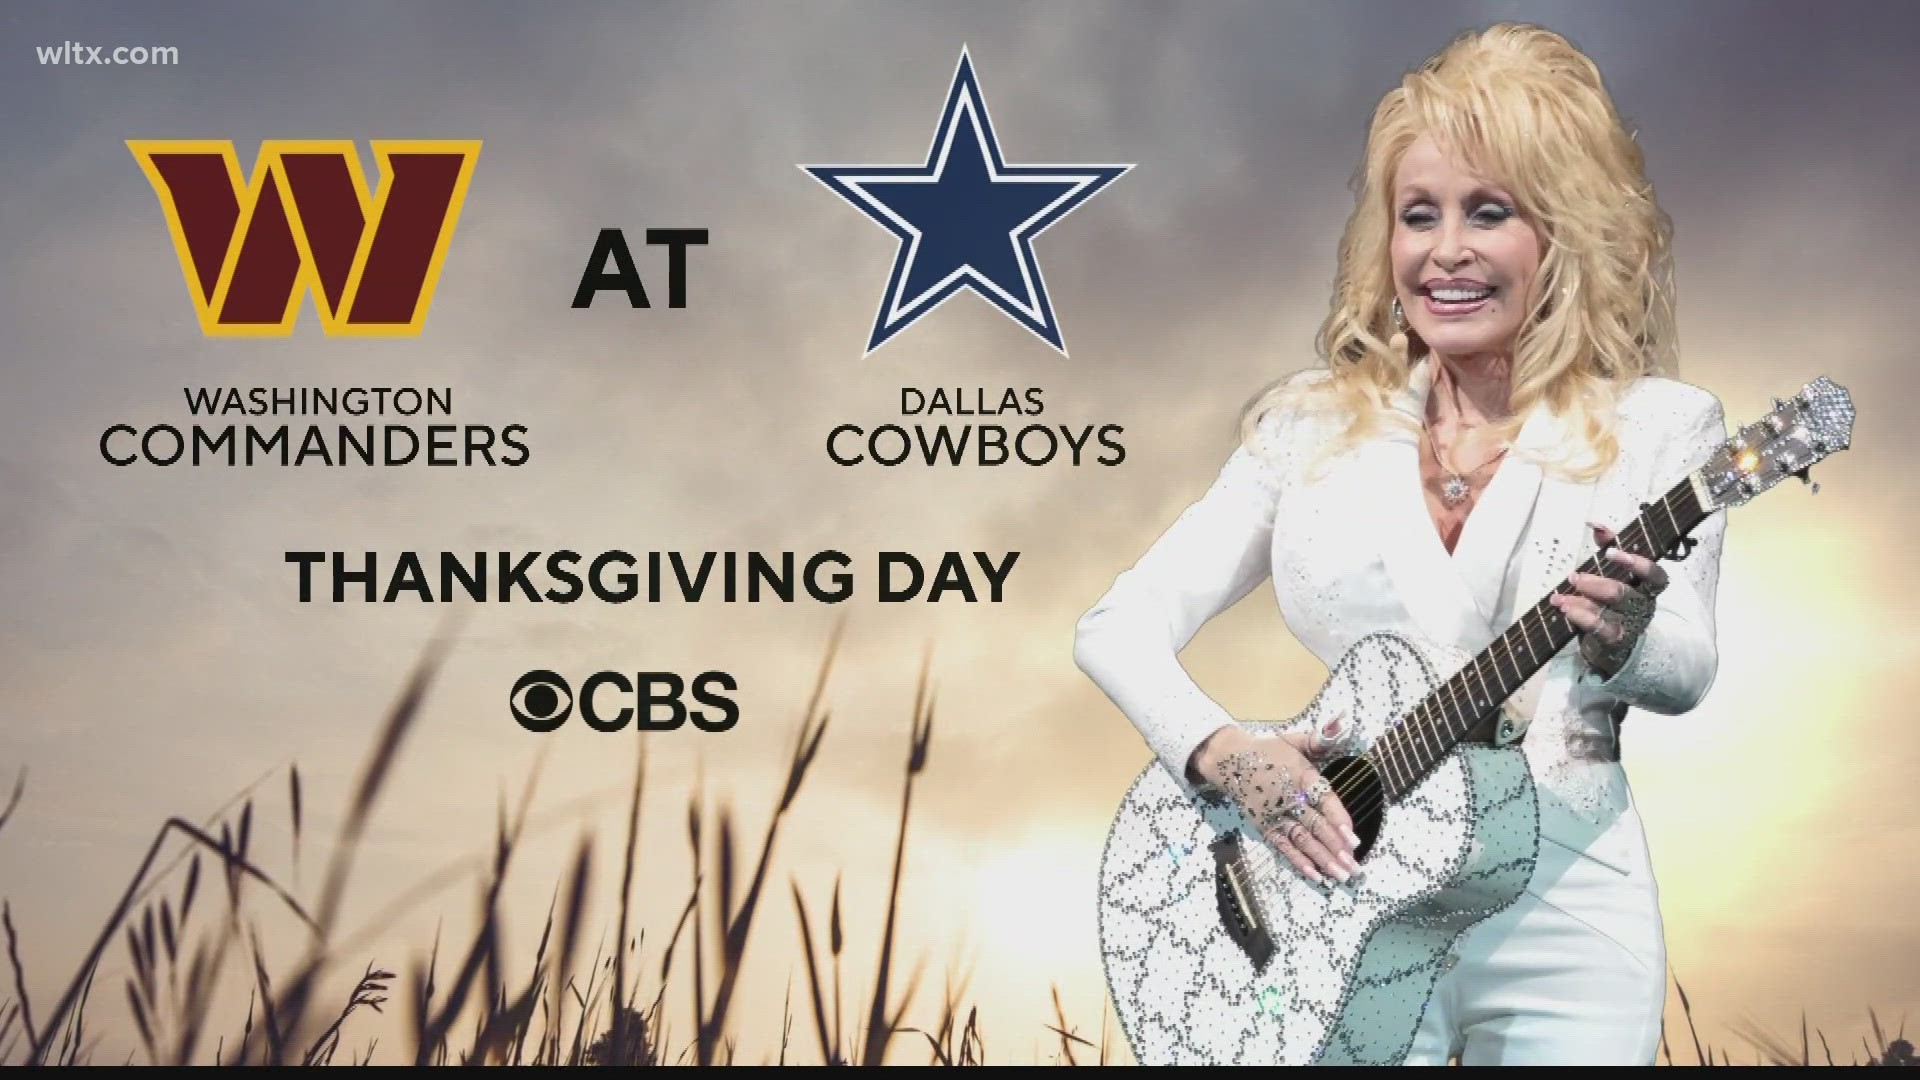 Dolly Parton will perform at halftime of the Cowboys' Thanksgiving Day